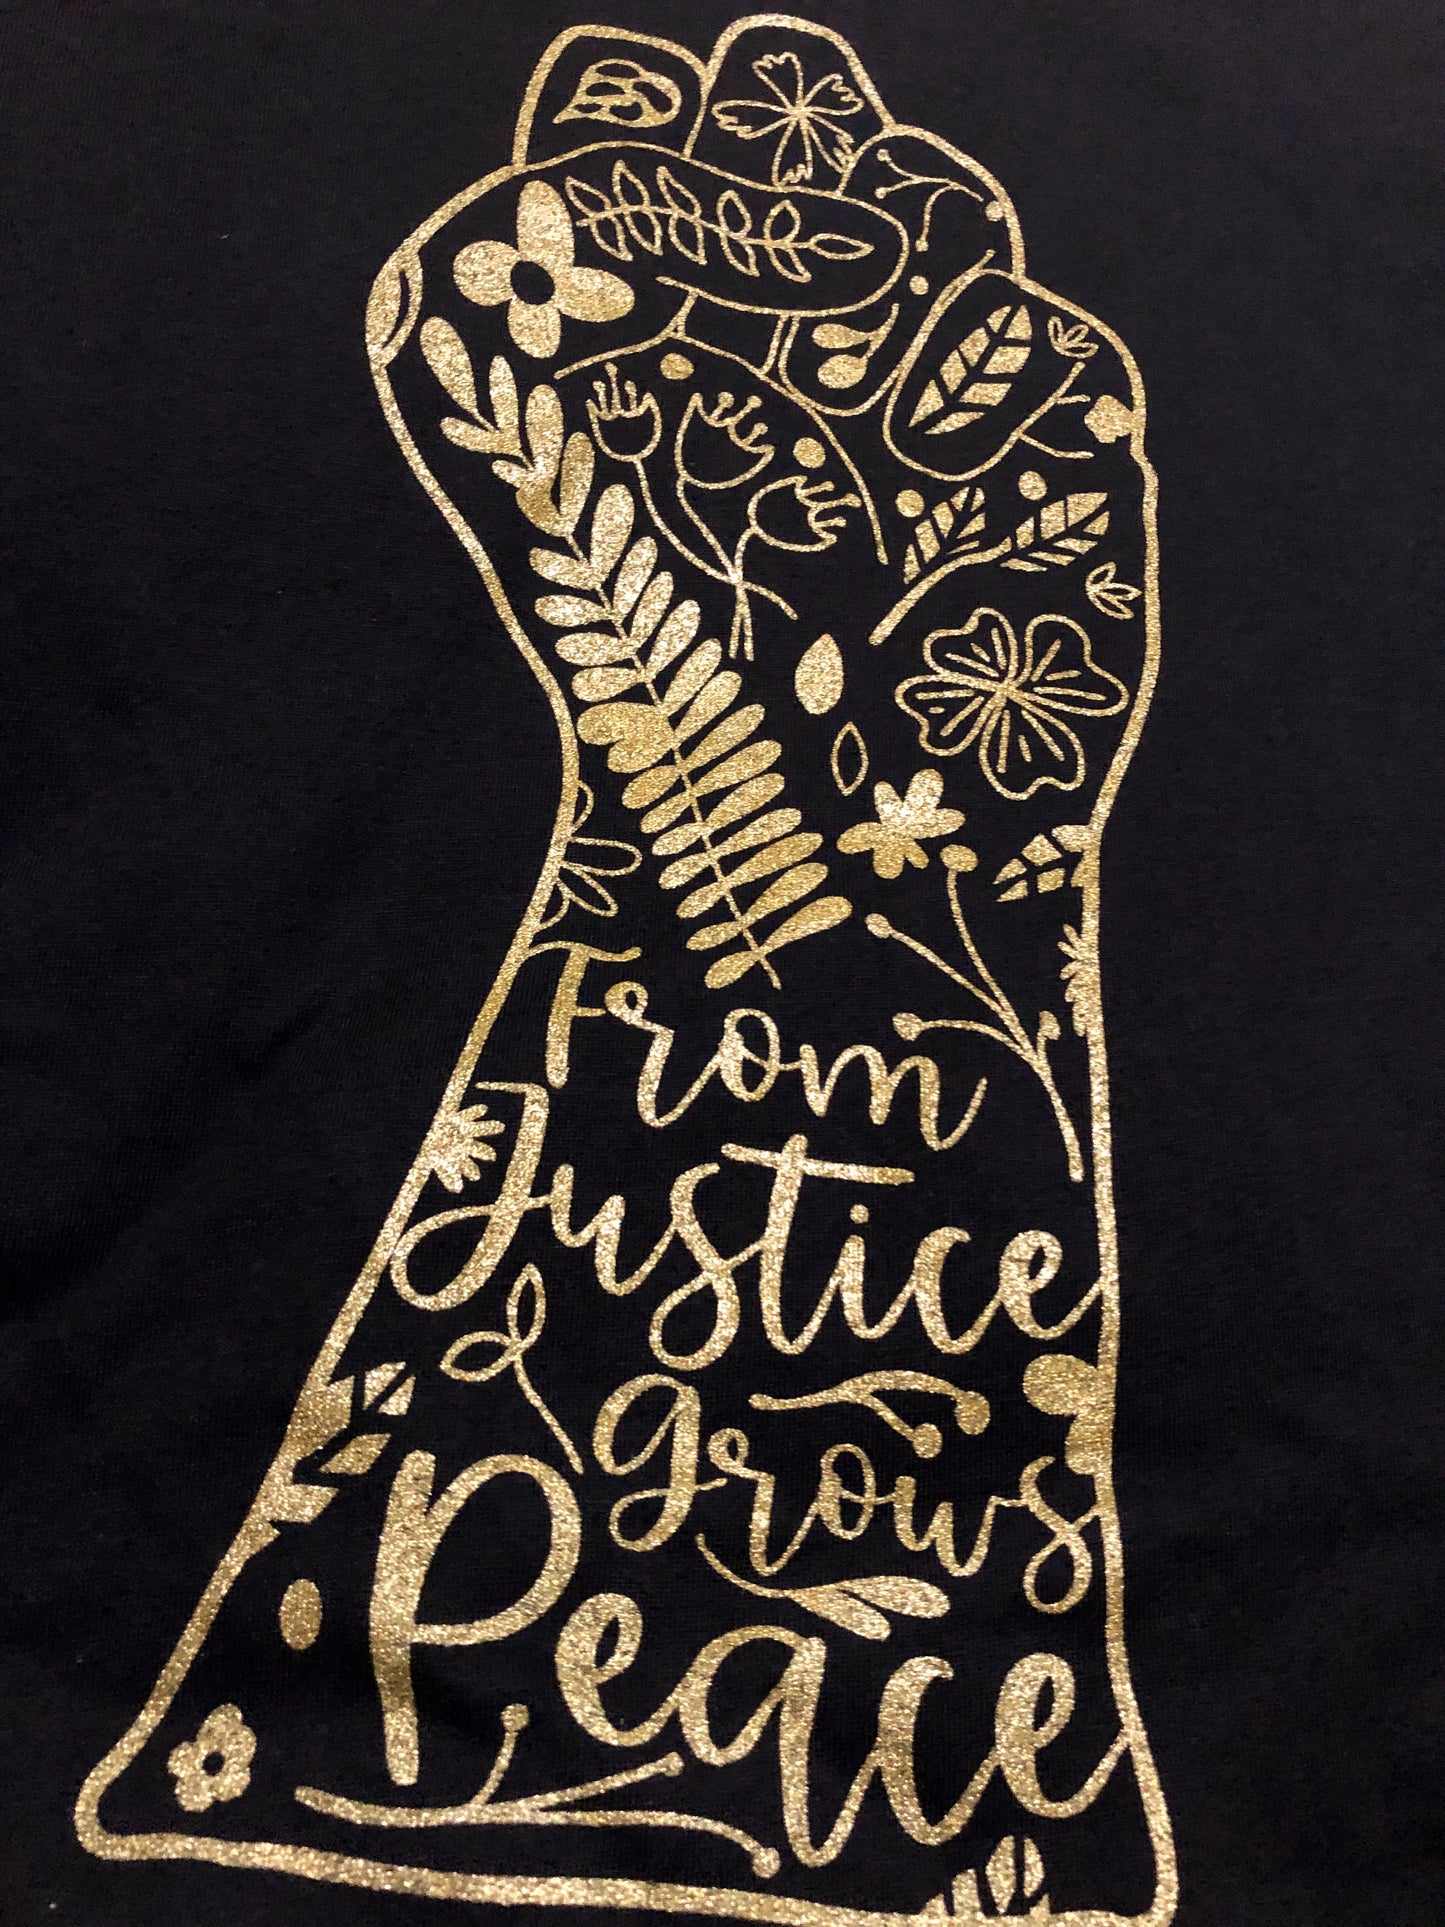 From Justice Grows Peace Black T-Shirt